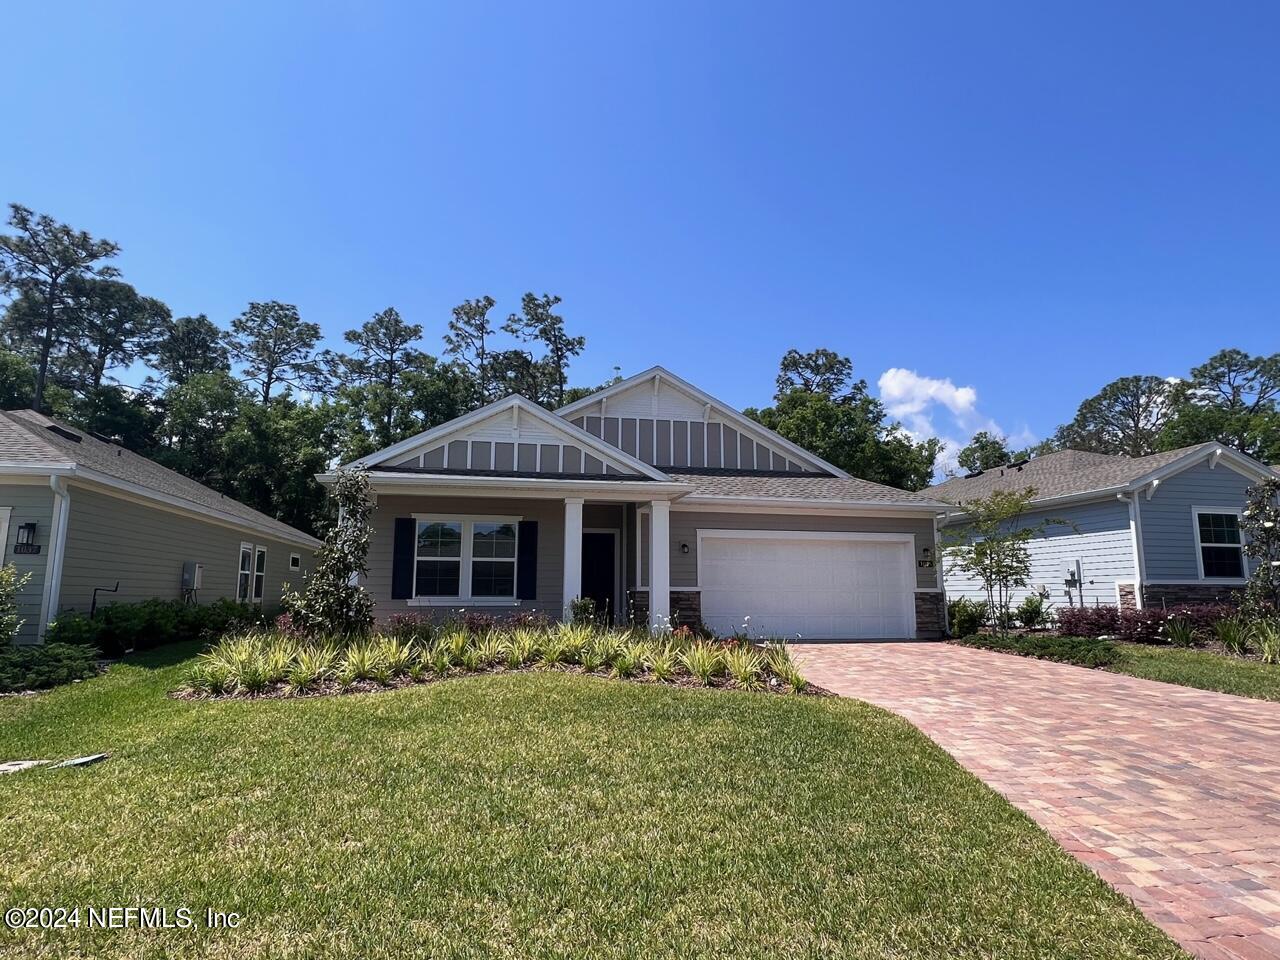 St Johns, FL home for sale located at 1045 Brown Bear Run, St Johns, FL 32259